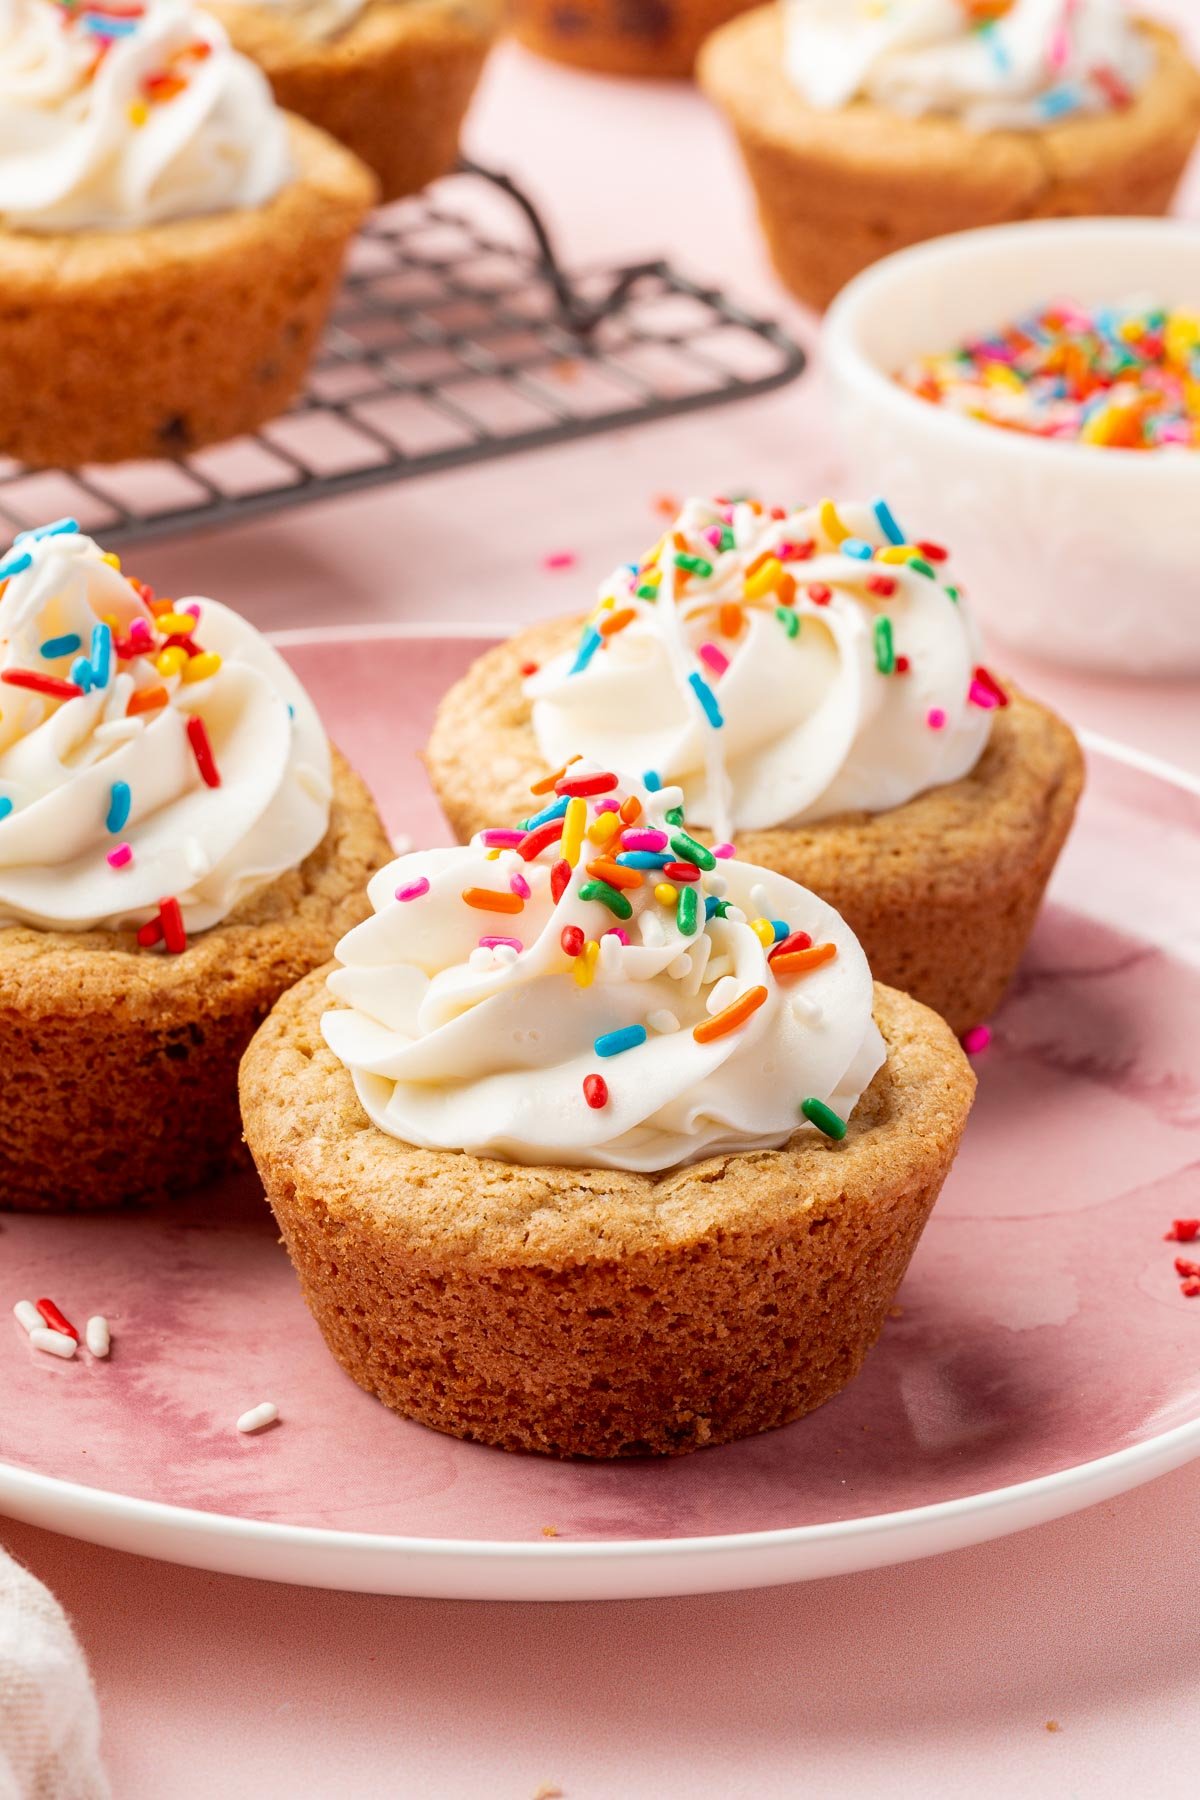 Three gluten-free cookie cups topped with vanilla frosting and rainbow sprinkles on a pink dessert plate with additional cookie cups in the background.